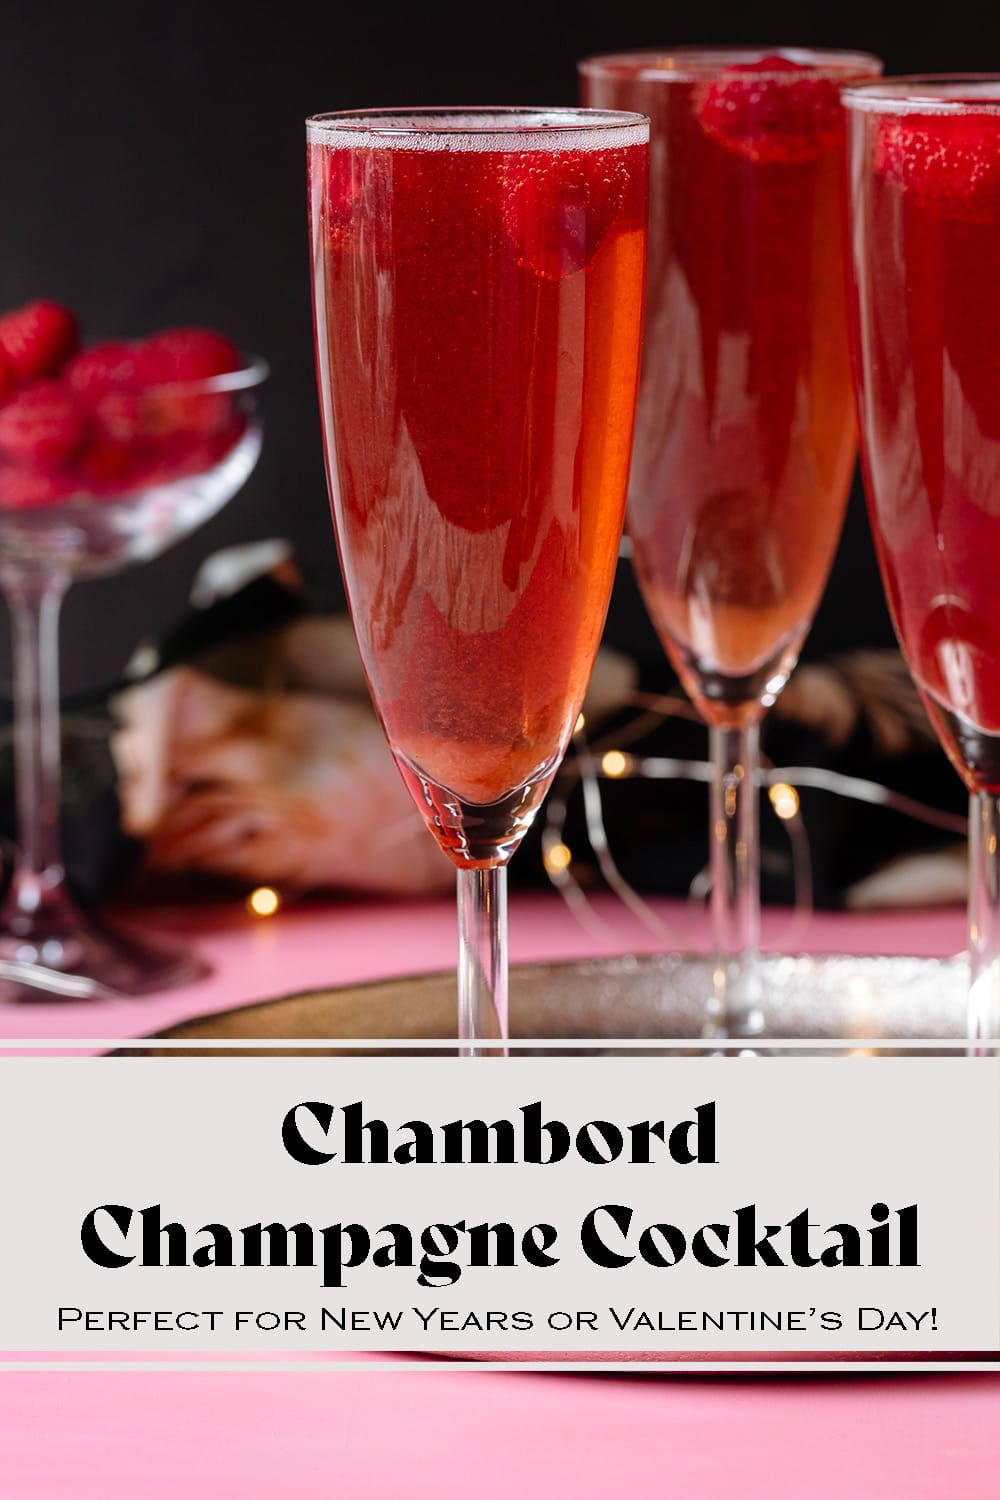 Chambord and Champagne Cocktail